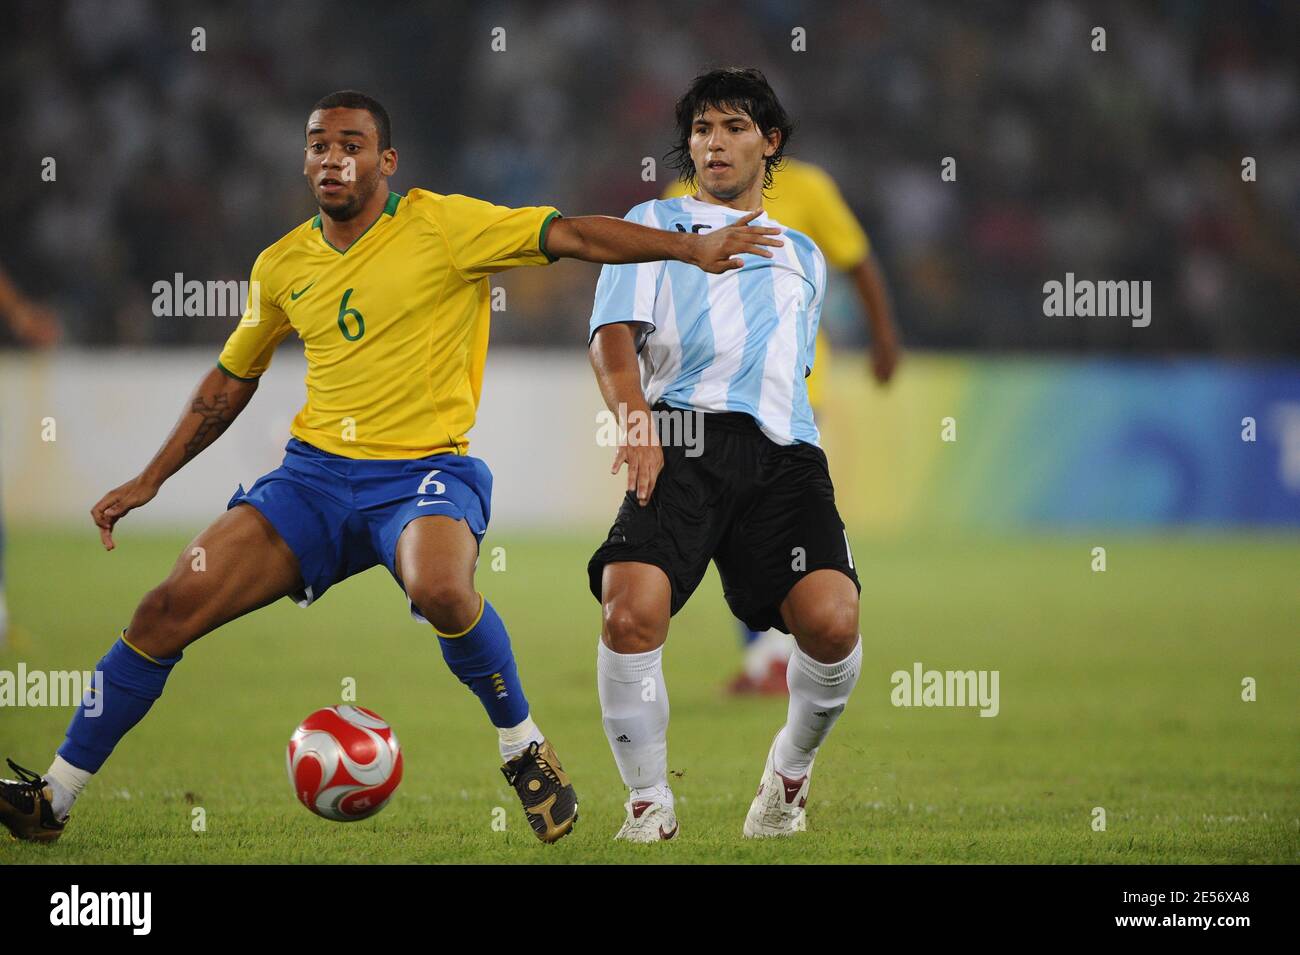 Brazil's Marcelo and Argentina's Sergio Aguero battle for the ball during the football semi-final match held at the Worker's Stadium for the 2008 Beijing Olympics, August 19, 2008. Argentina defeats Brazil 3-0. Photo by Gouhier-Hahn-Nebinger/Cameleon/ABACAPRESS.COM Stock Photo